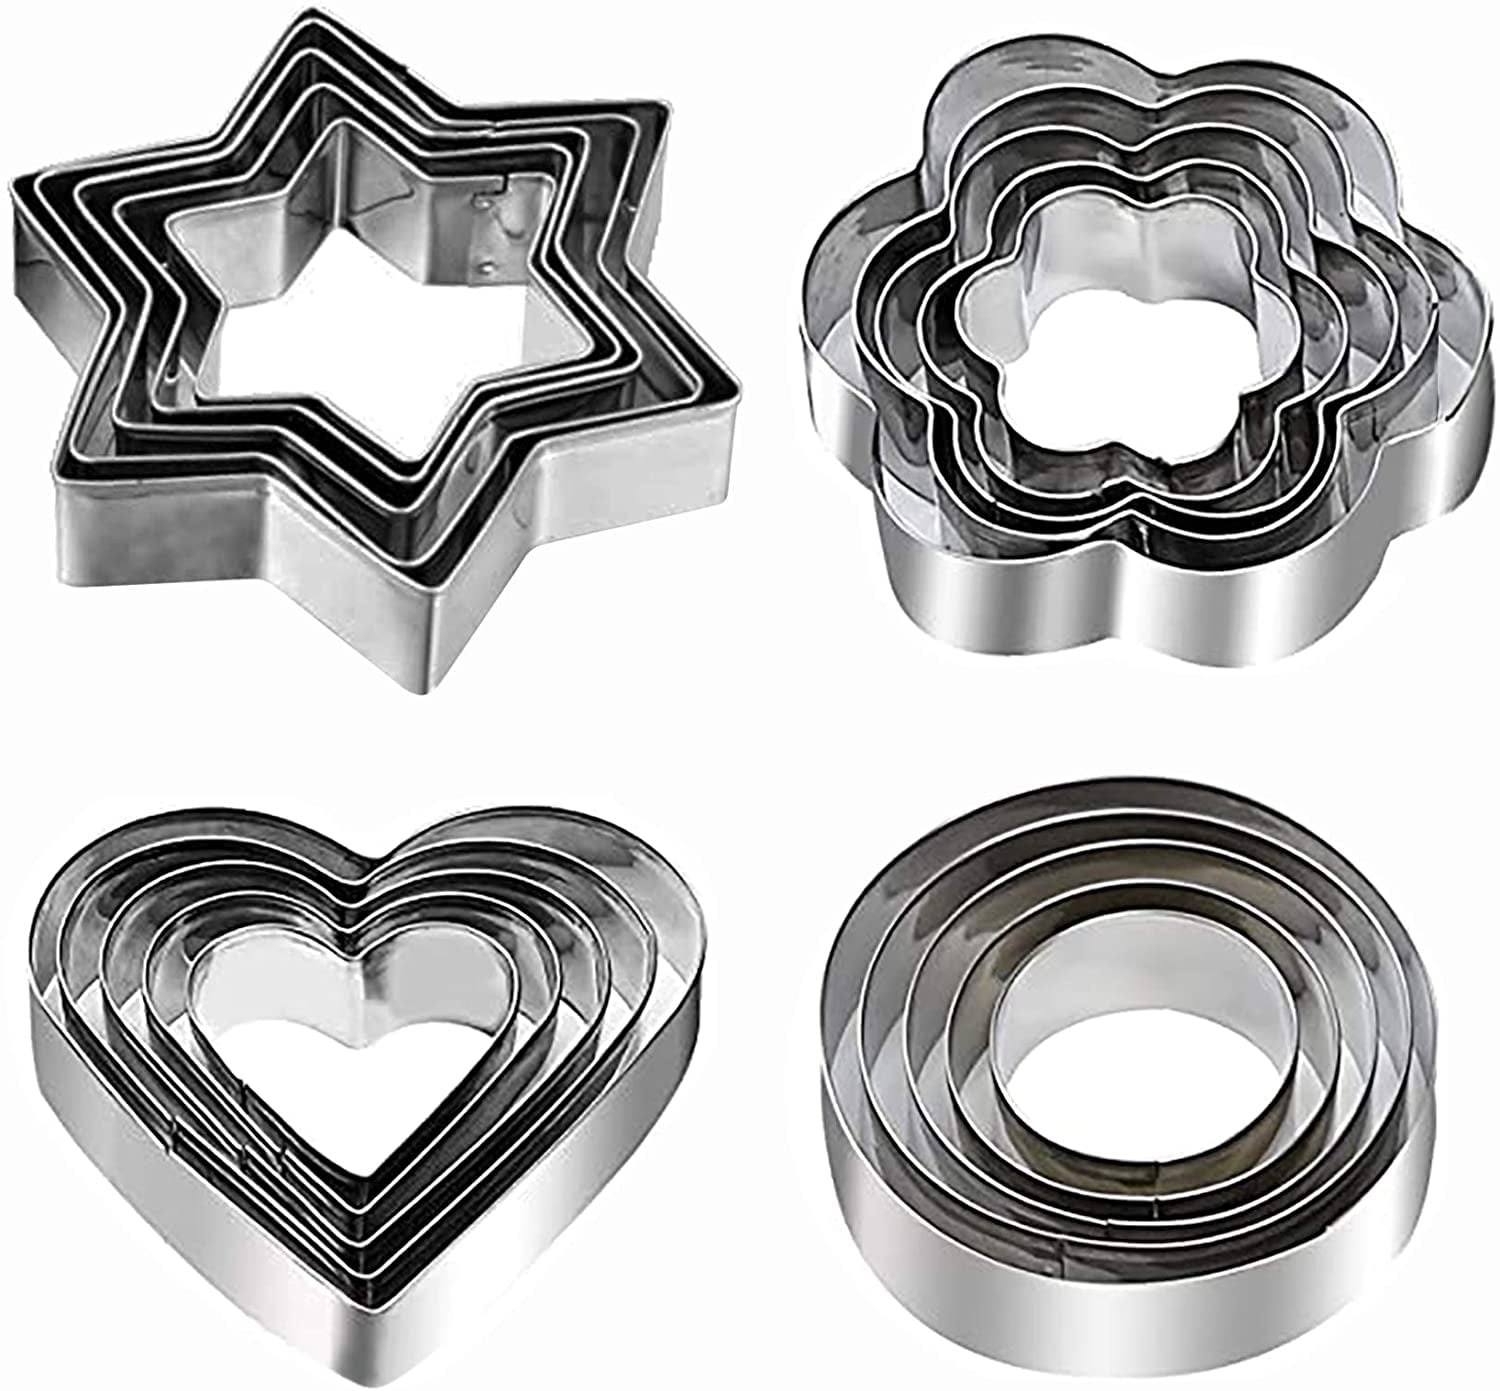 DD-life Pack of 2 Stainless Steel Wavy & Straight Soap Mold Loaf soap cutter  Garnish